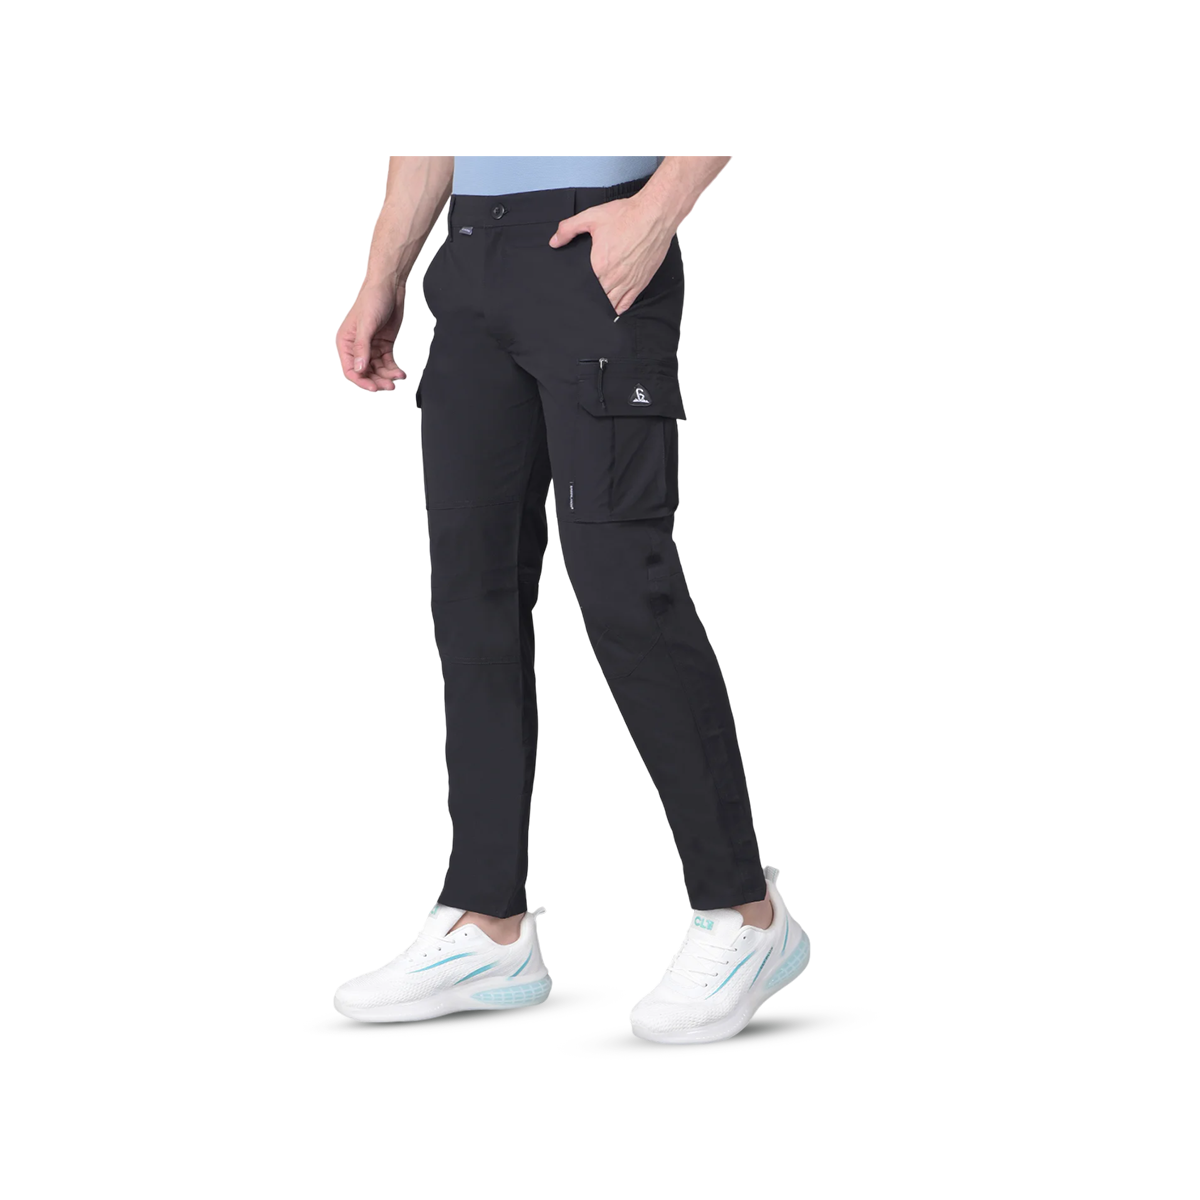 QUADRA Black Trouser for Sleek Style and All-Day Comfort - Large